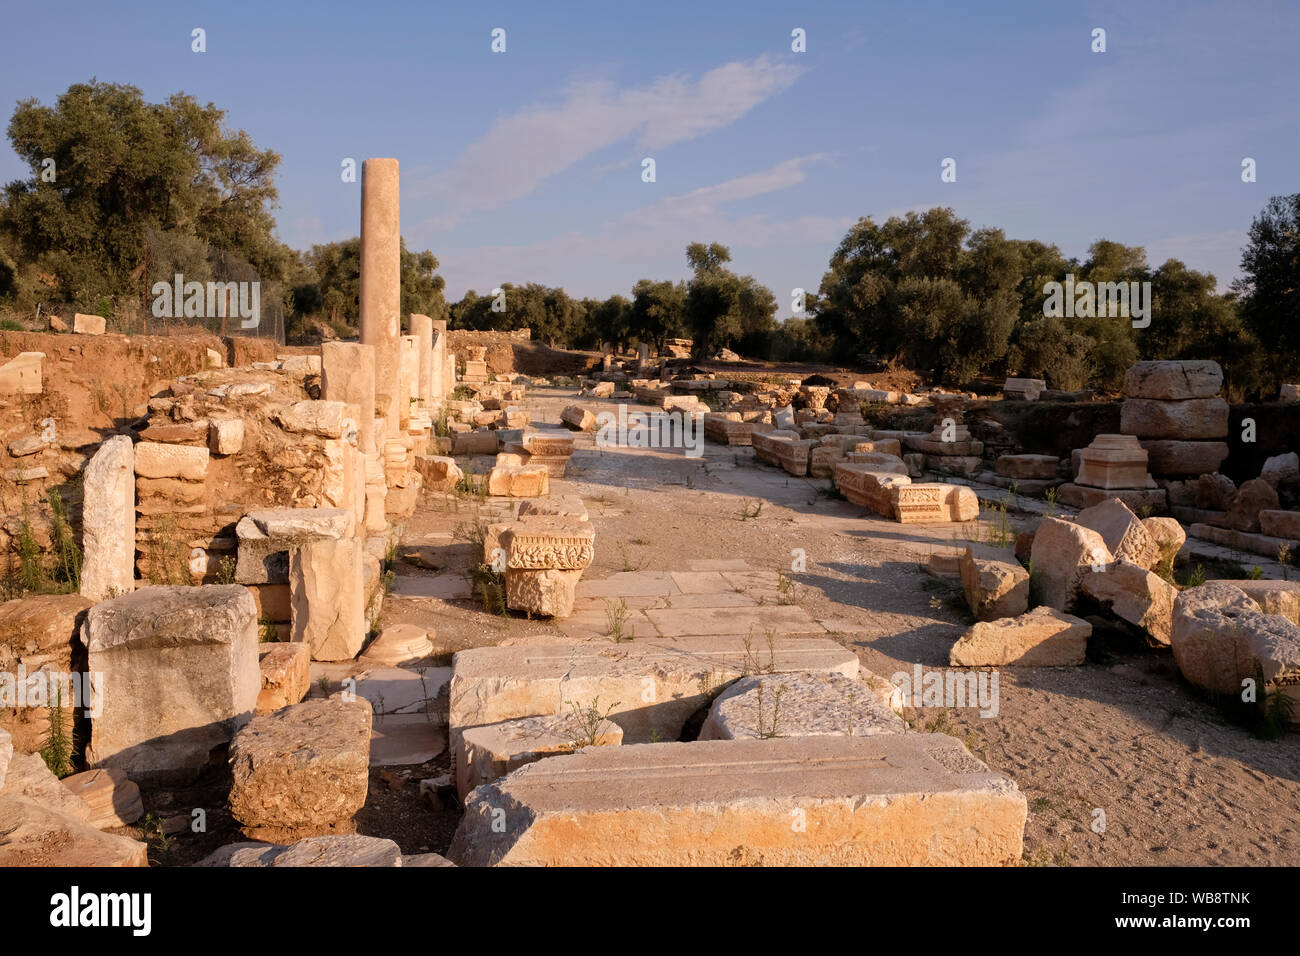 Nysa, one of the most important cities of Caria in Hellenistic and Roman period, is located on the highway connecting Aydin. Stock Photo